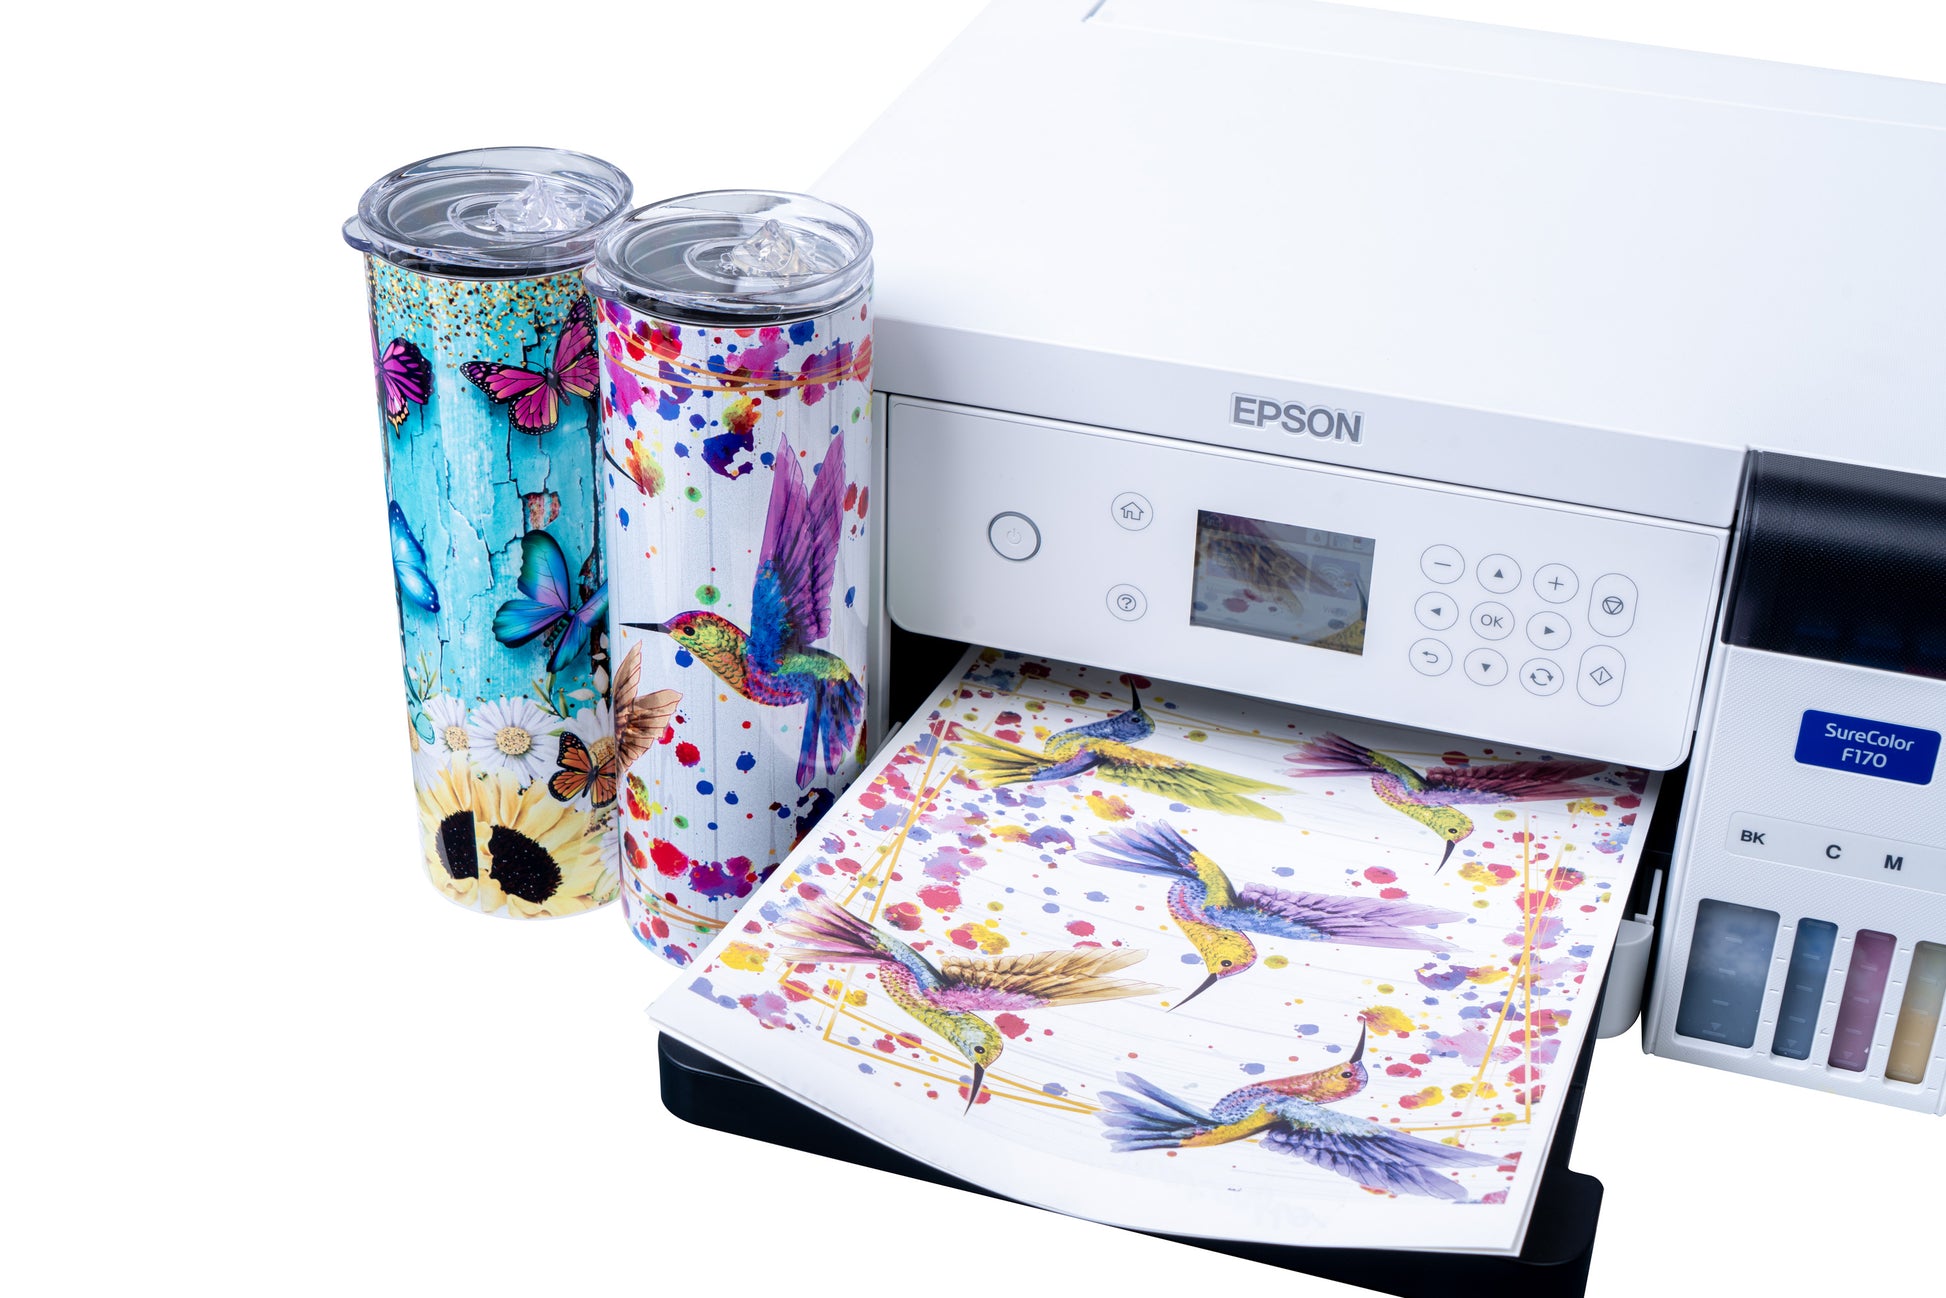 SureColor F170 Dye-Sublimation Printer - Certified ReNew, Products